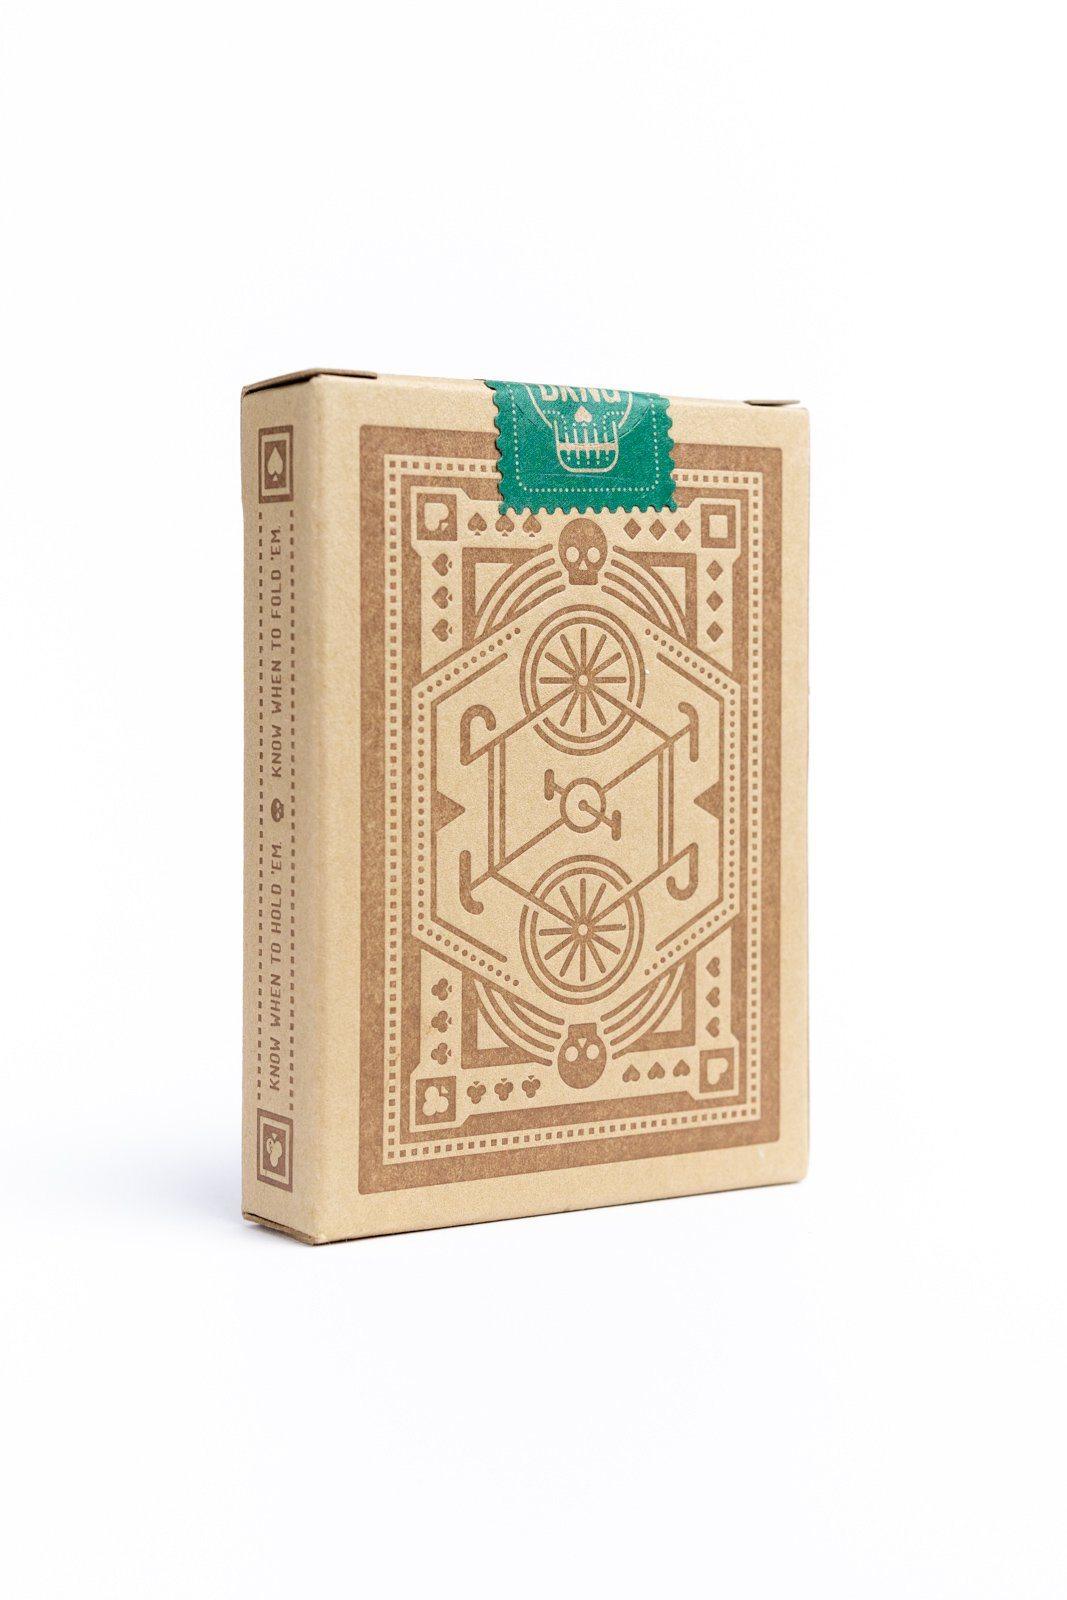 Limited Edition Brand New Sealed Green Wheel Playing Cards 